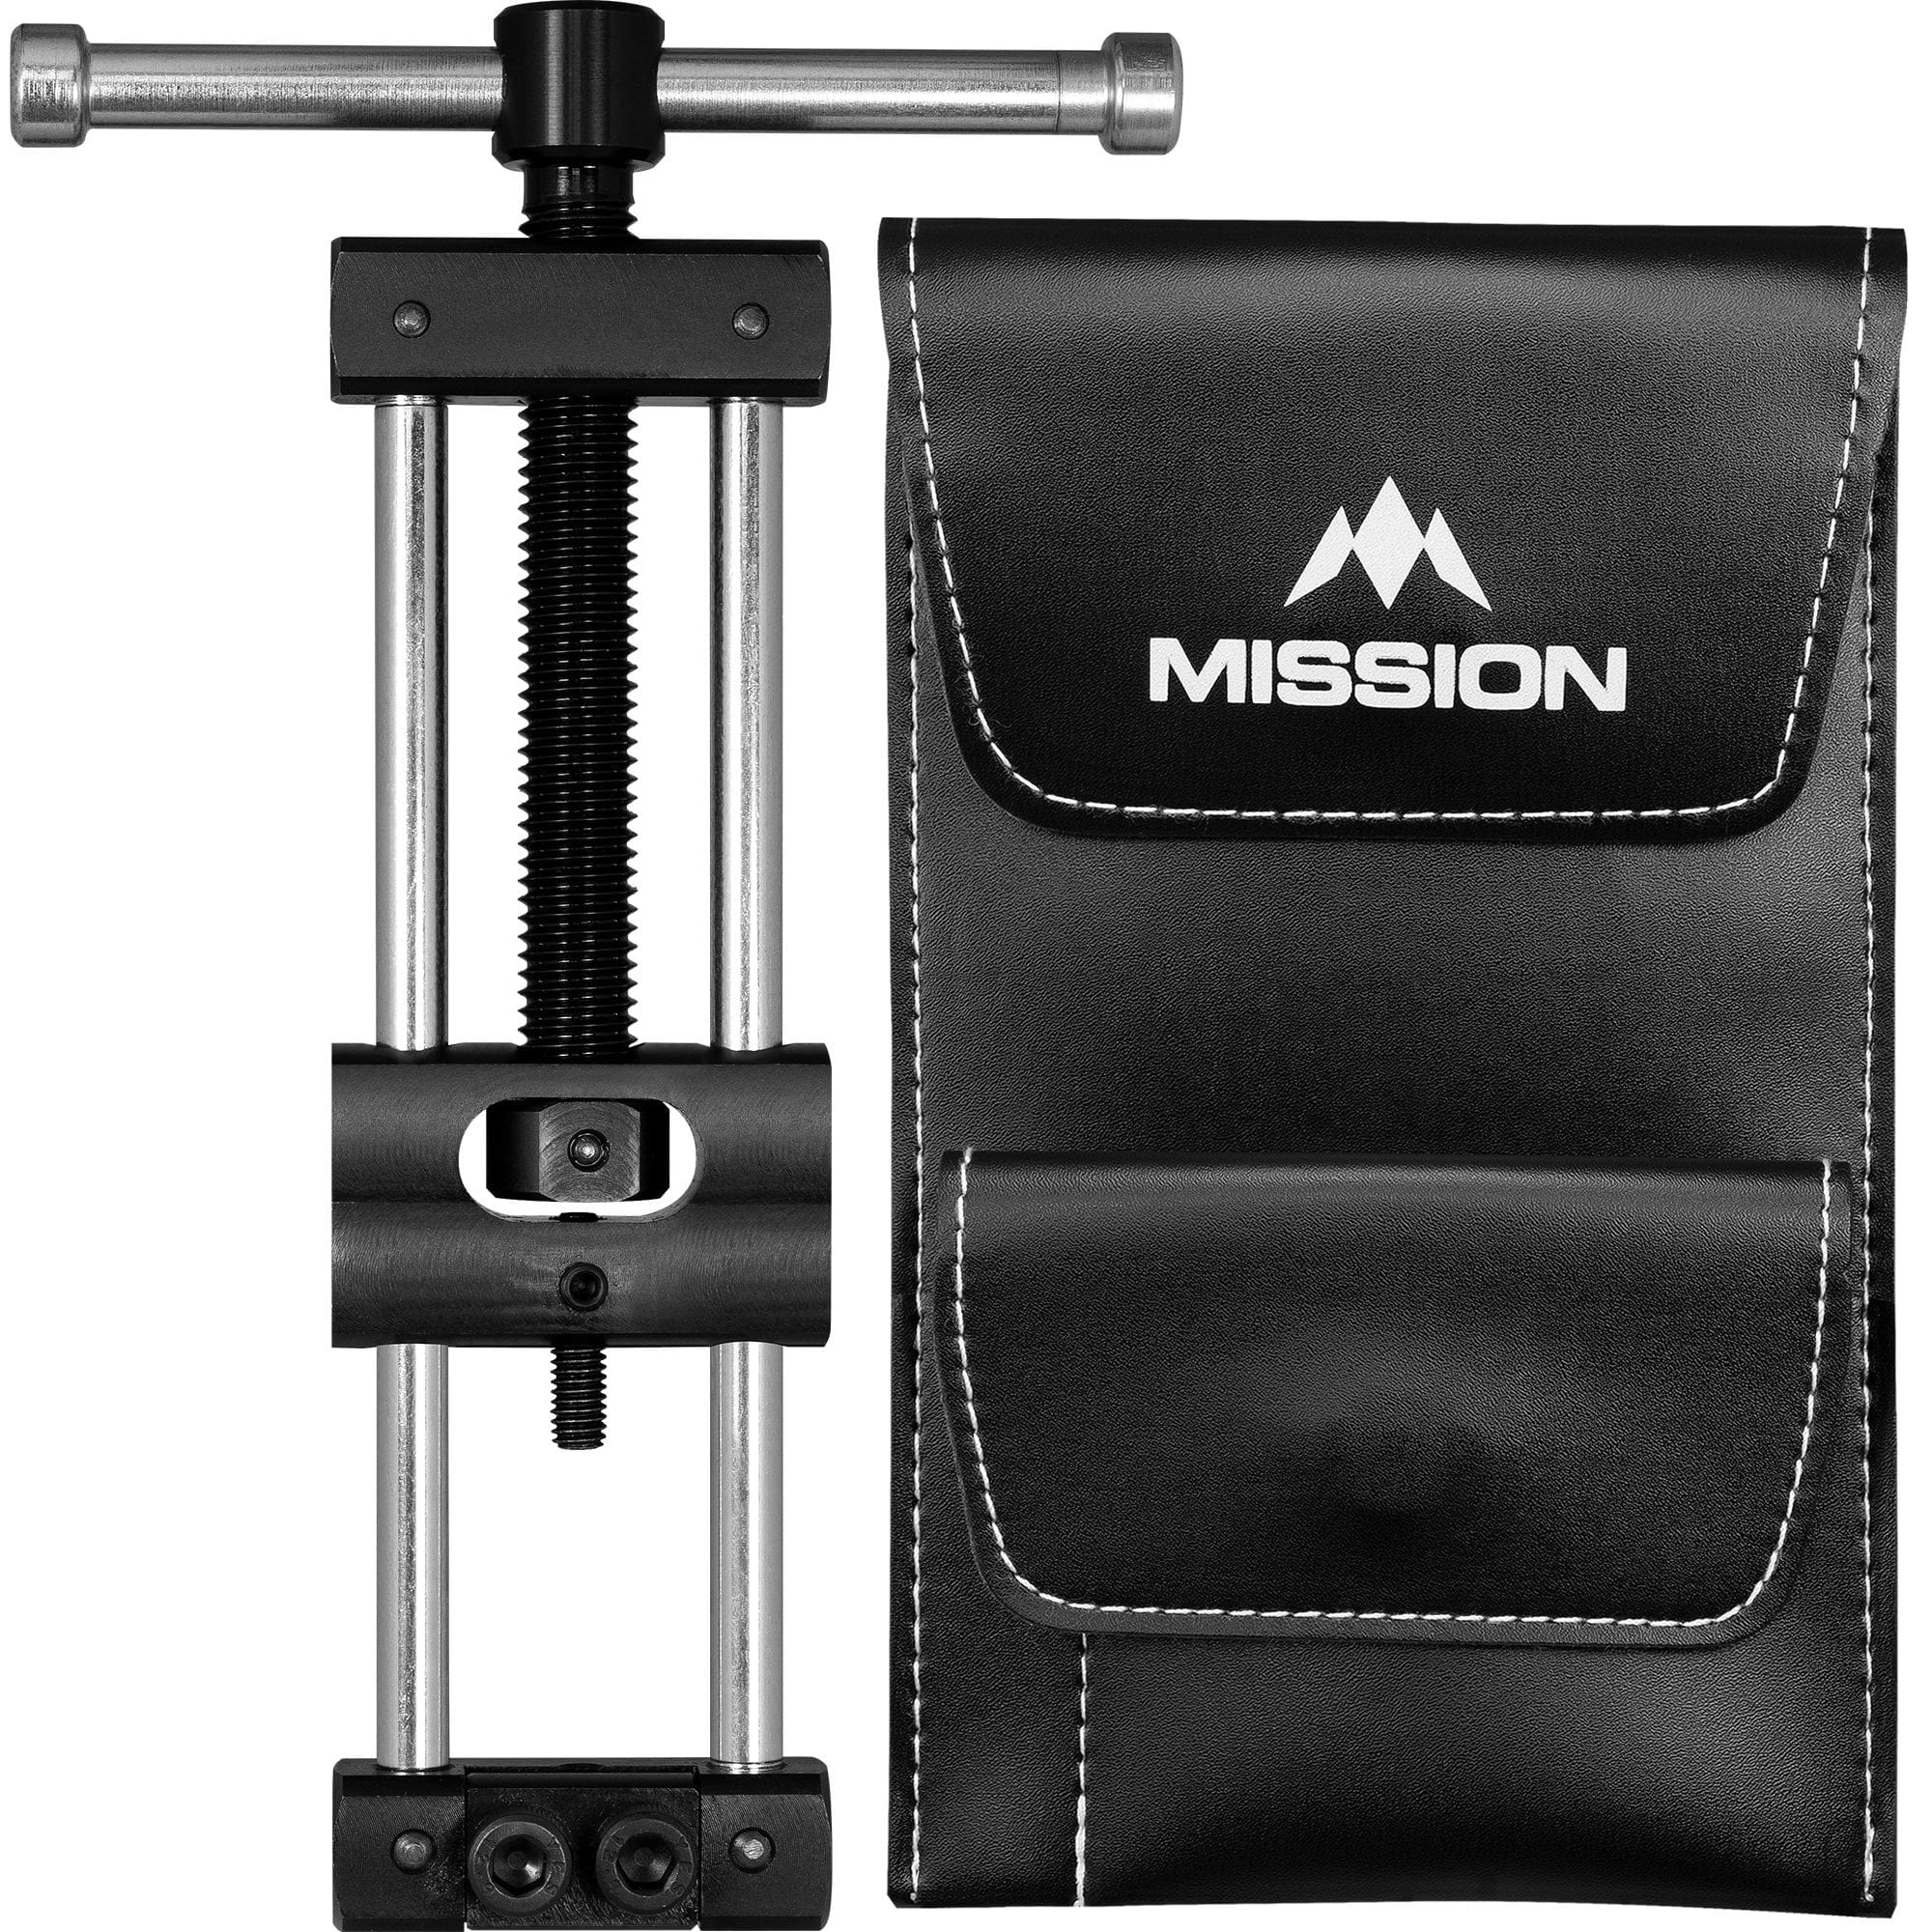 Mission - R-Point Expert - Hand Held Repointer - Black